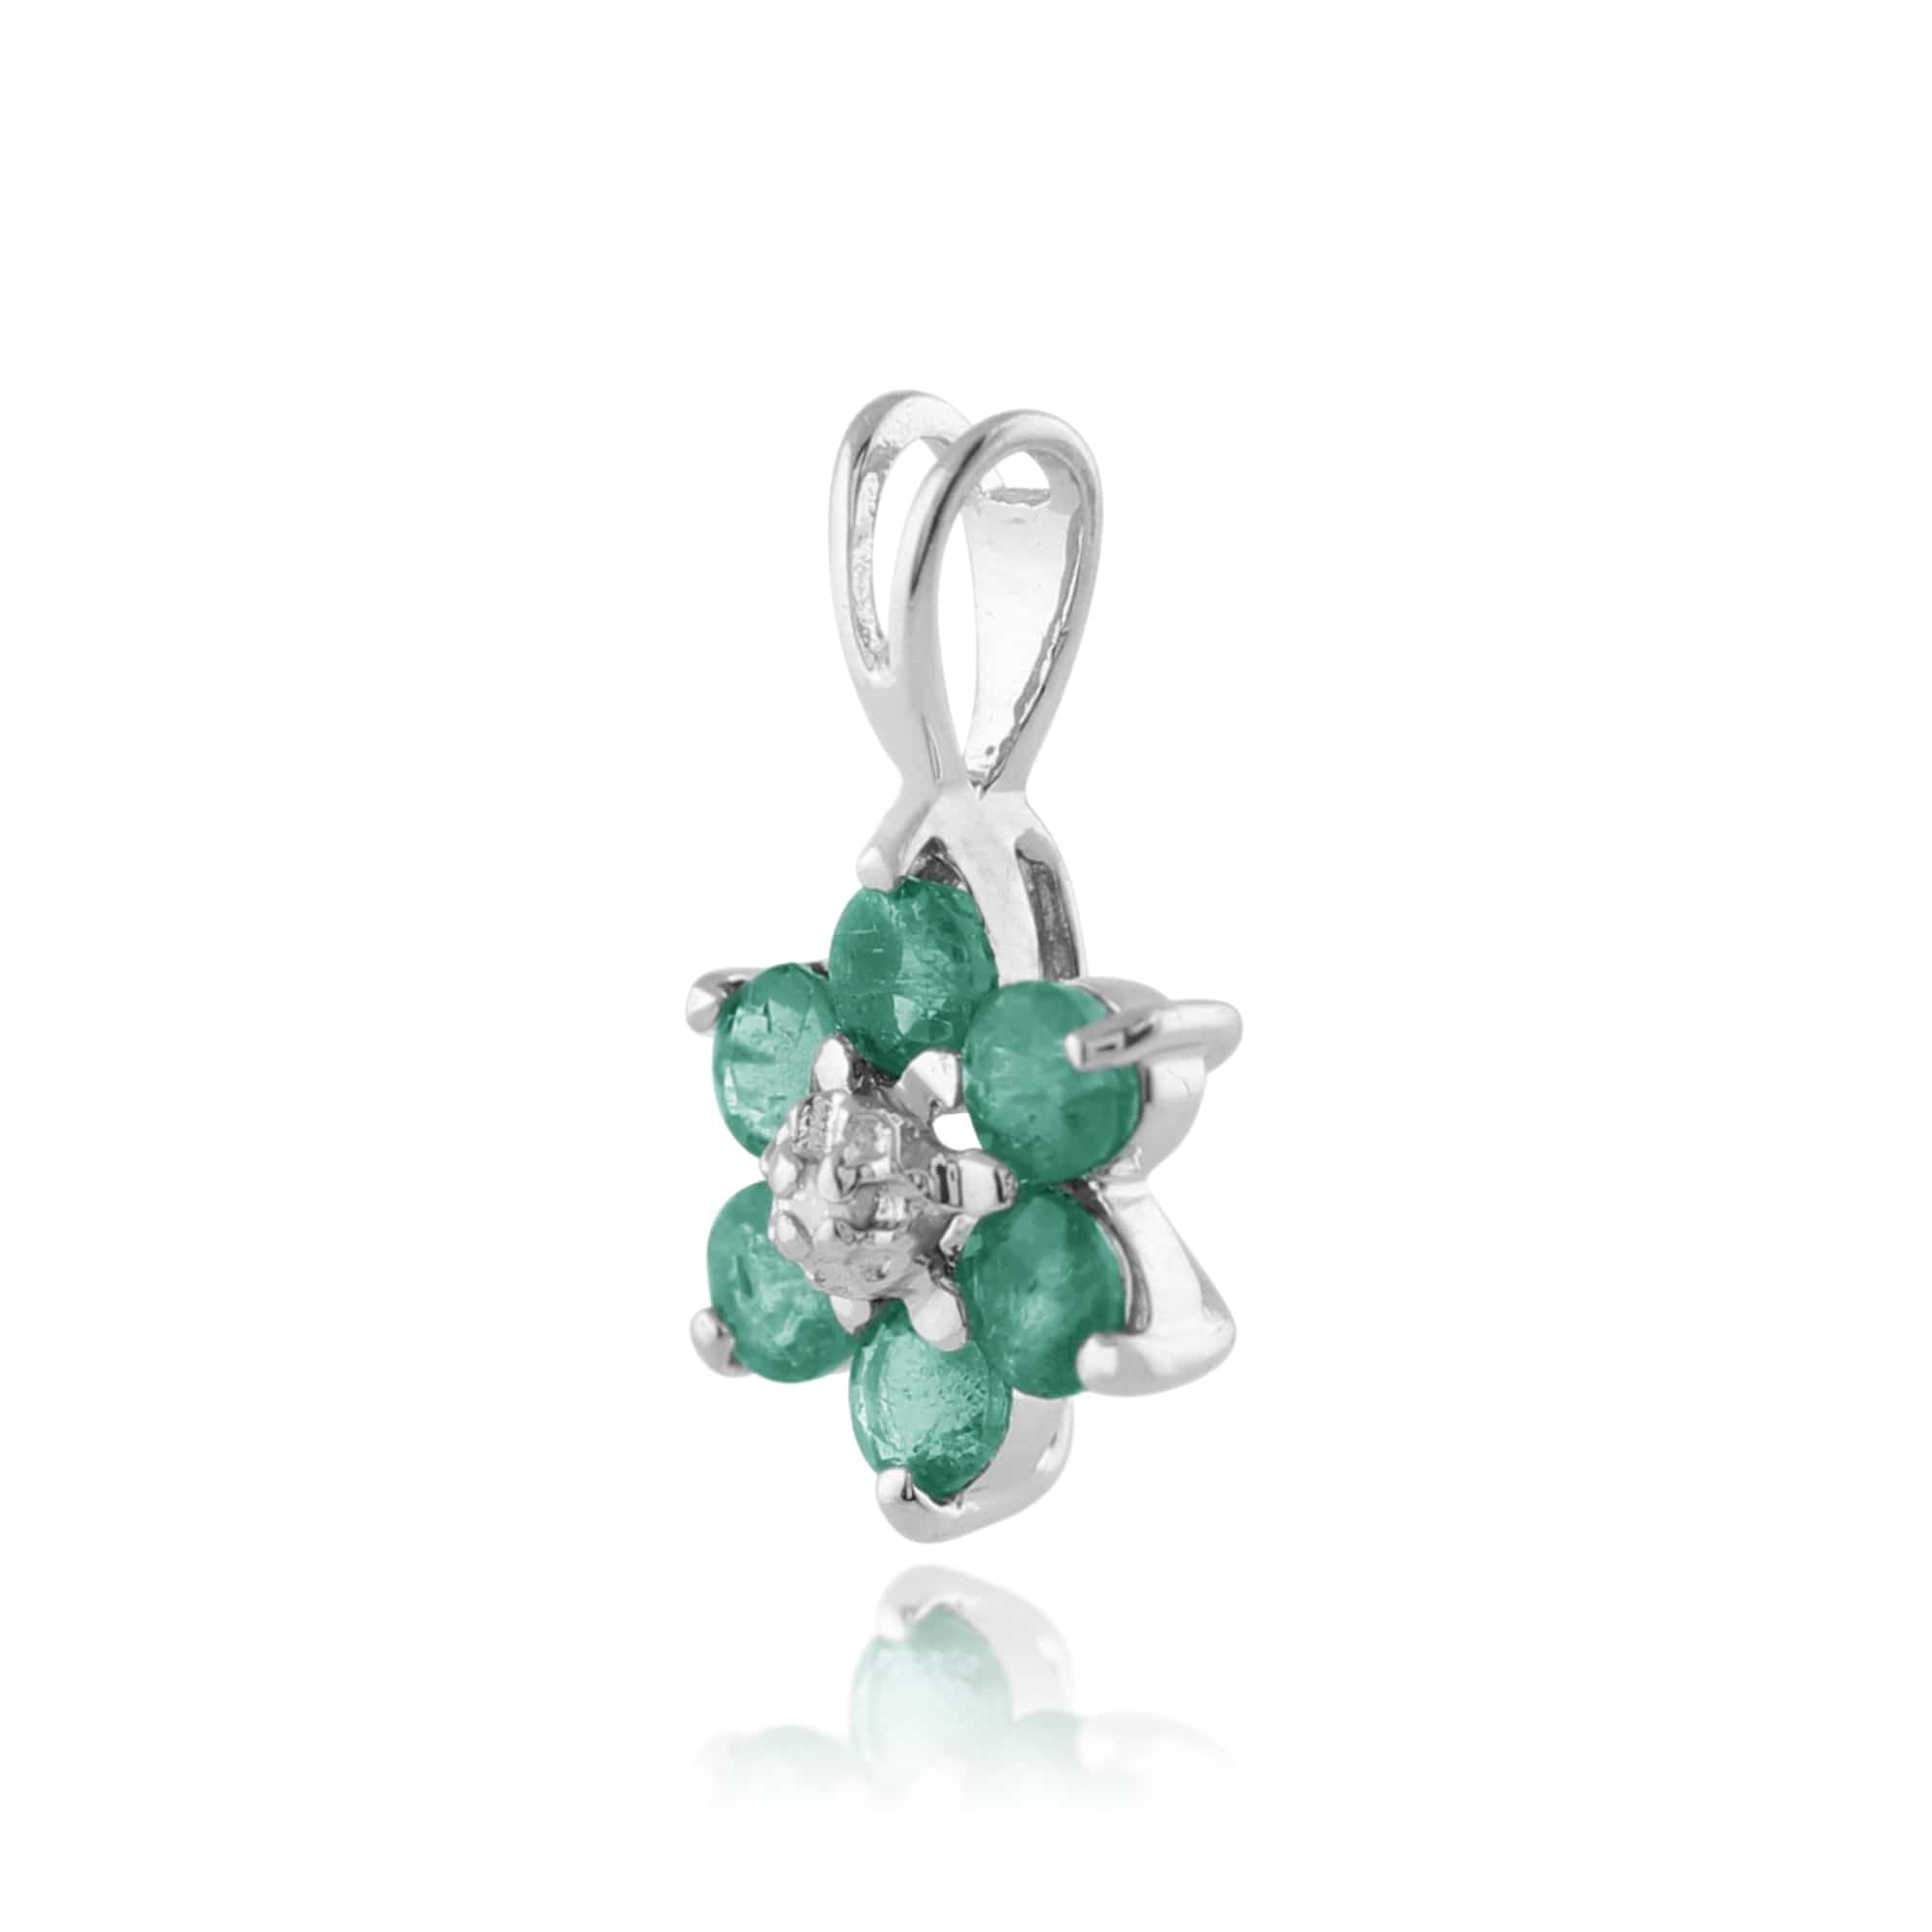 117E0009039-117P0625039 Floral Round Emerald & Diamond Flower Cluster Stud Earrings & Pendant Set in 9ct White Gold 4